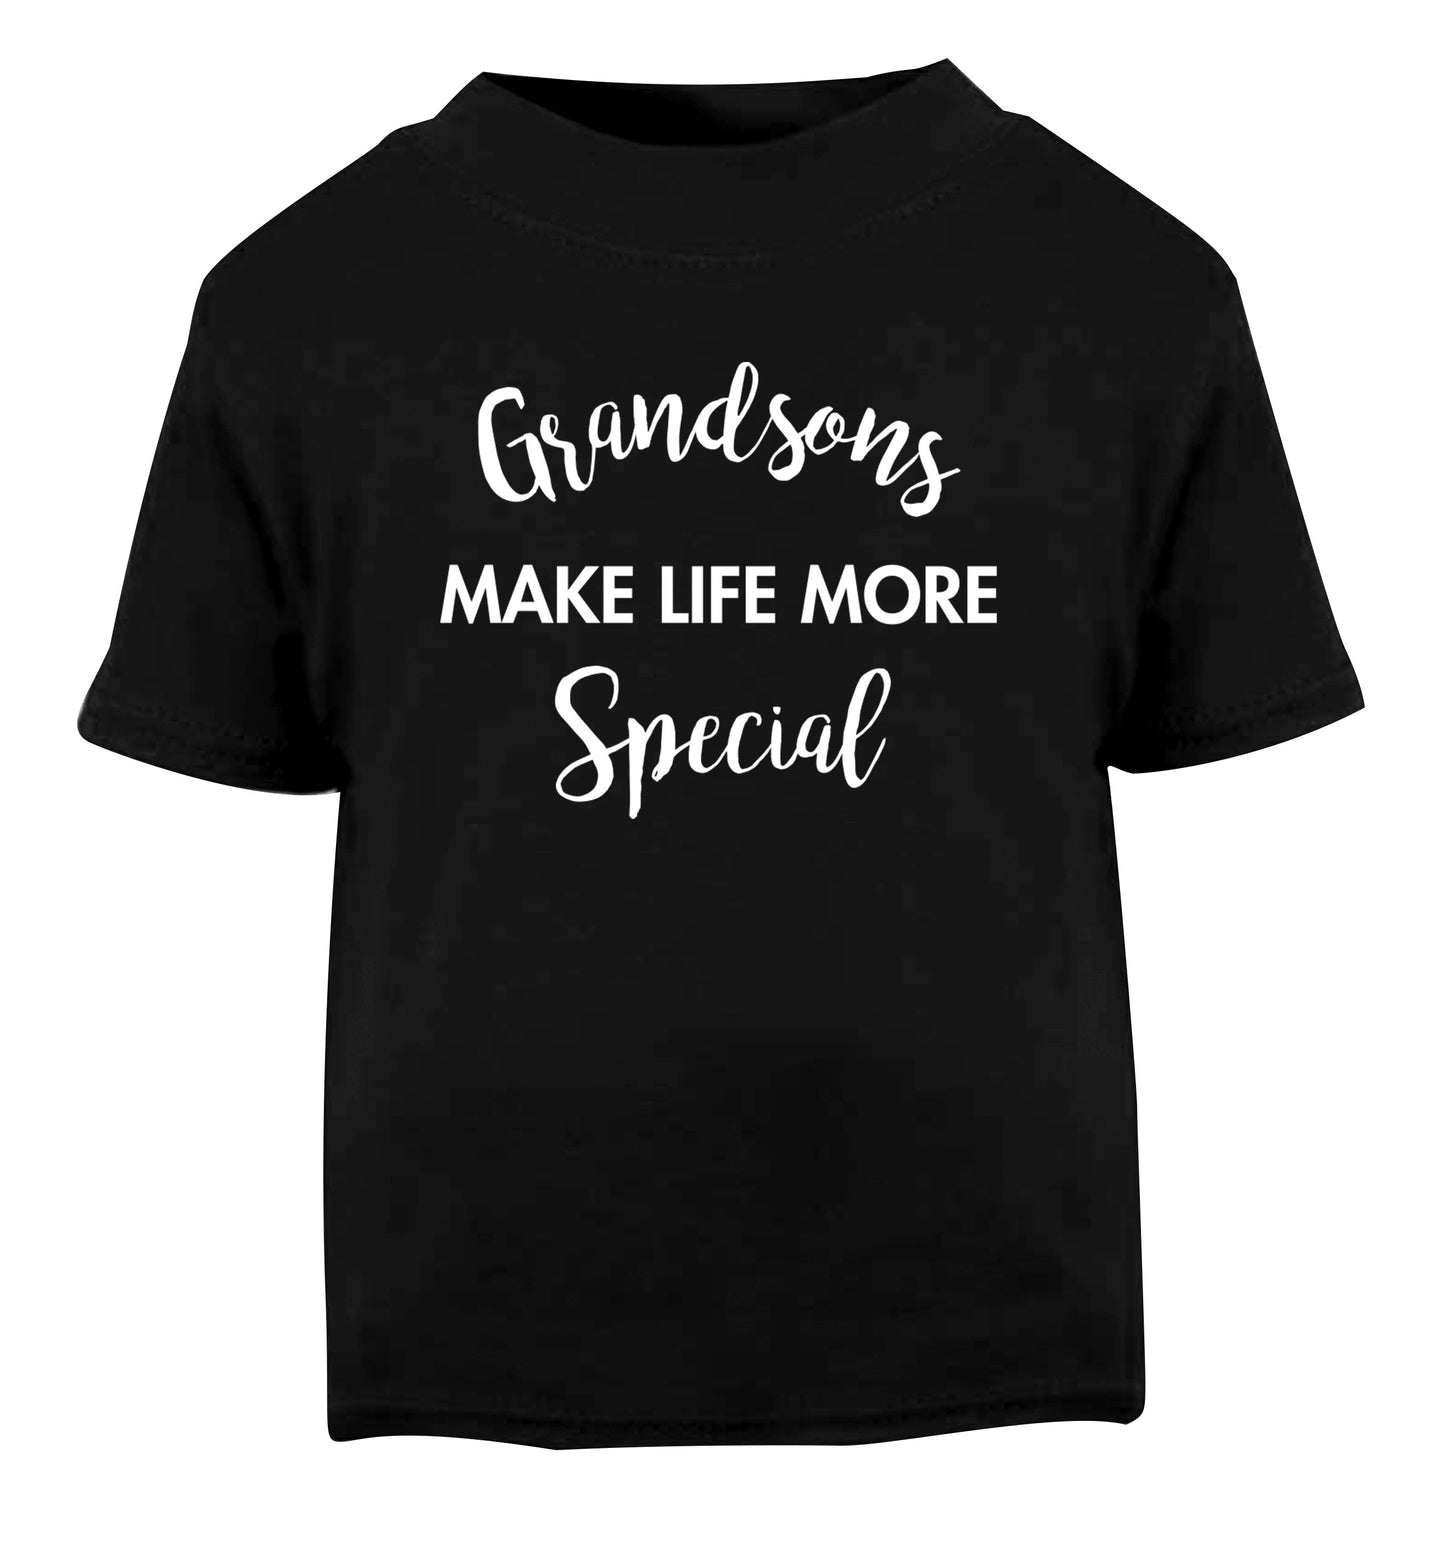 Grandsons make life more special Black Baby Toddler Tshirt 2 years